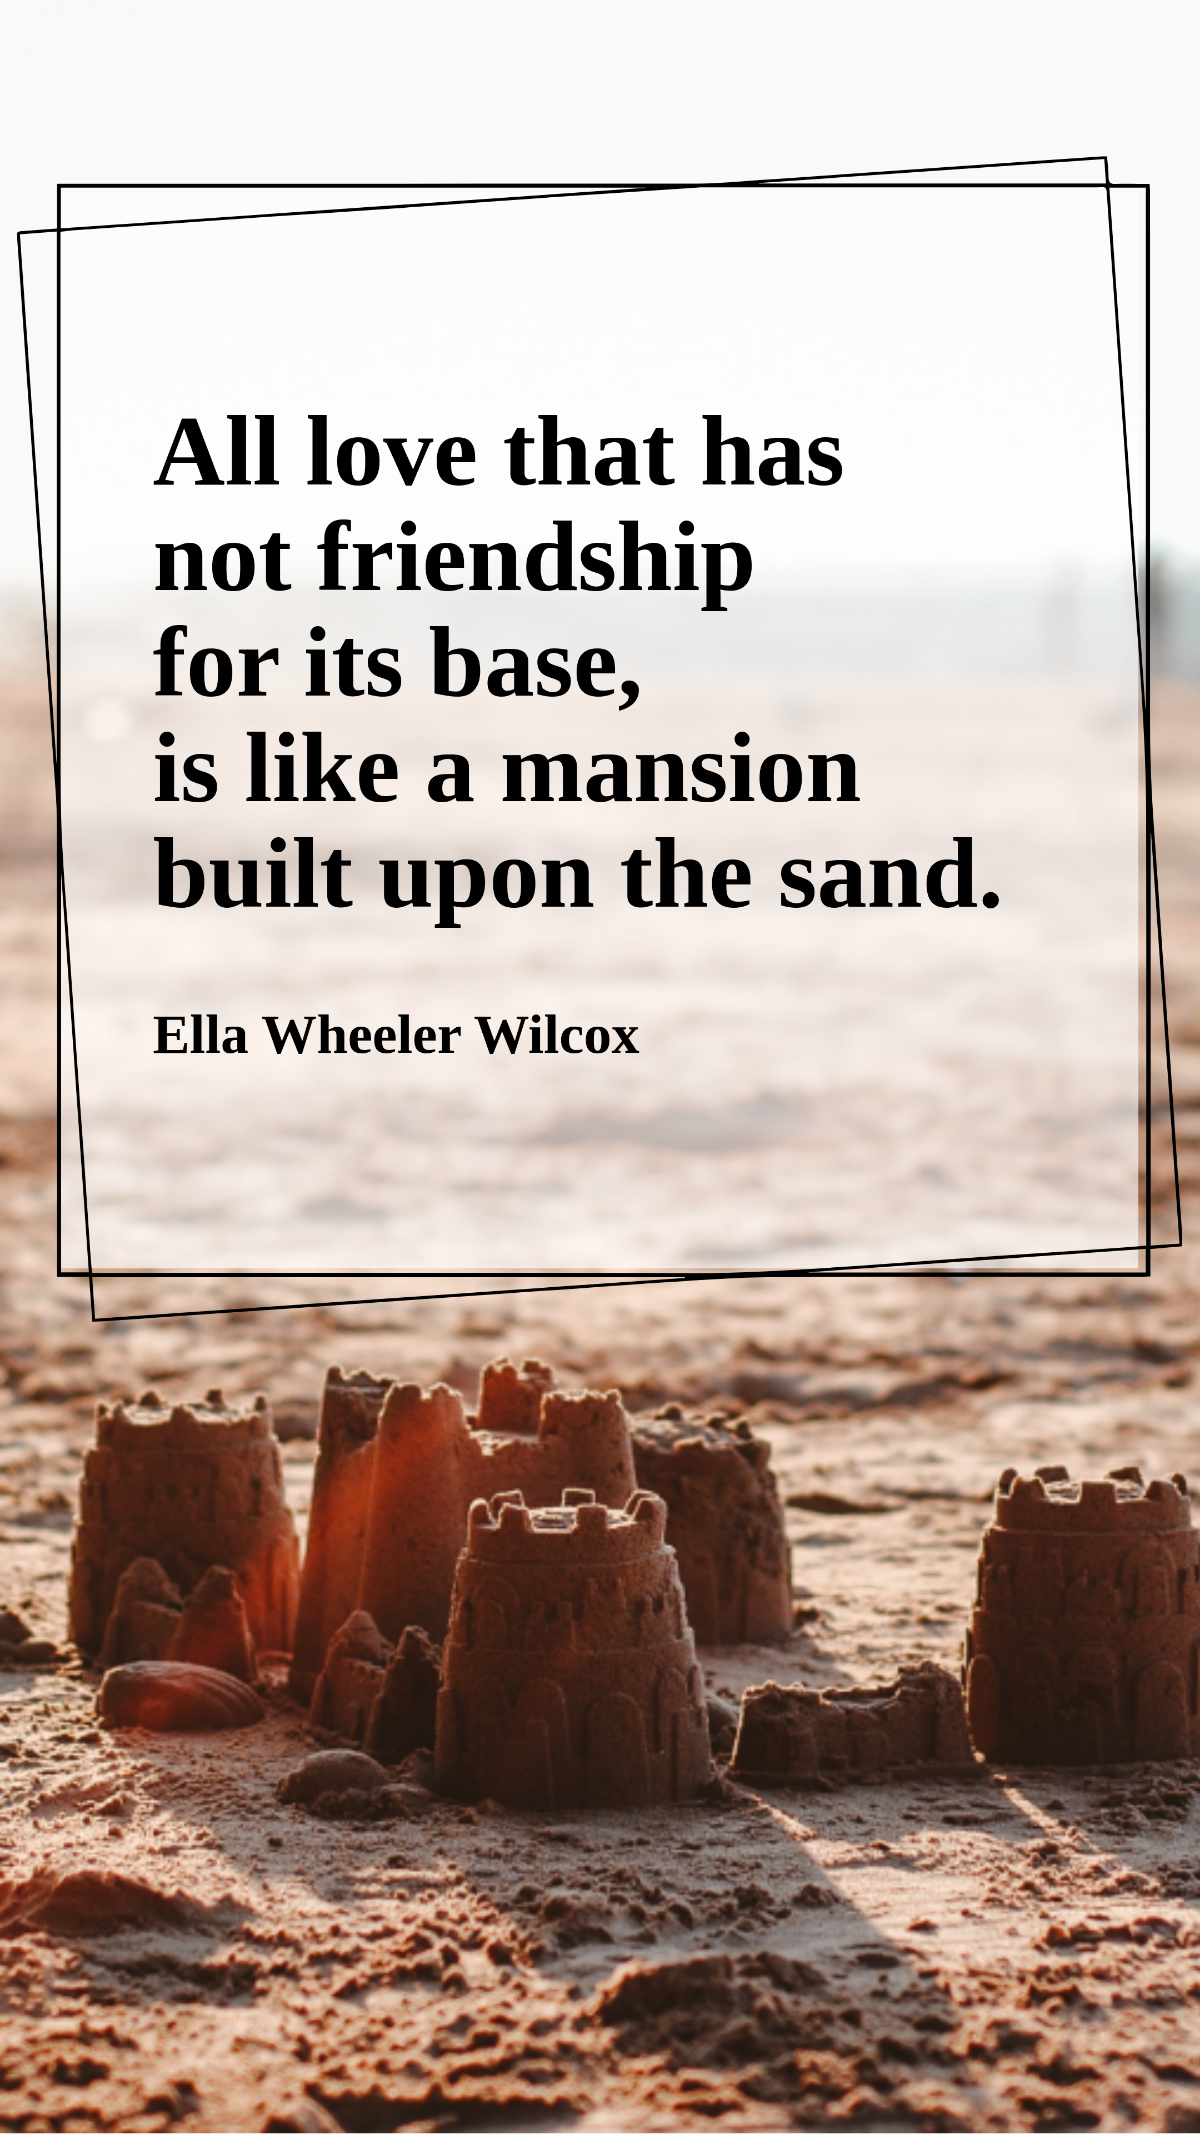 Ella Wheeler Wilcox - All love that has not friendship for its base, is like a mansion built upon the sand. Template